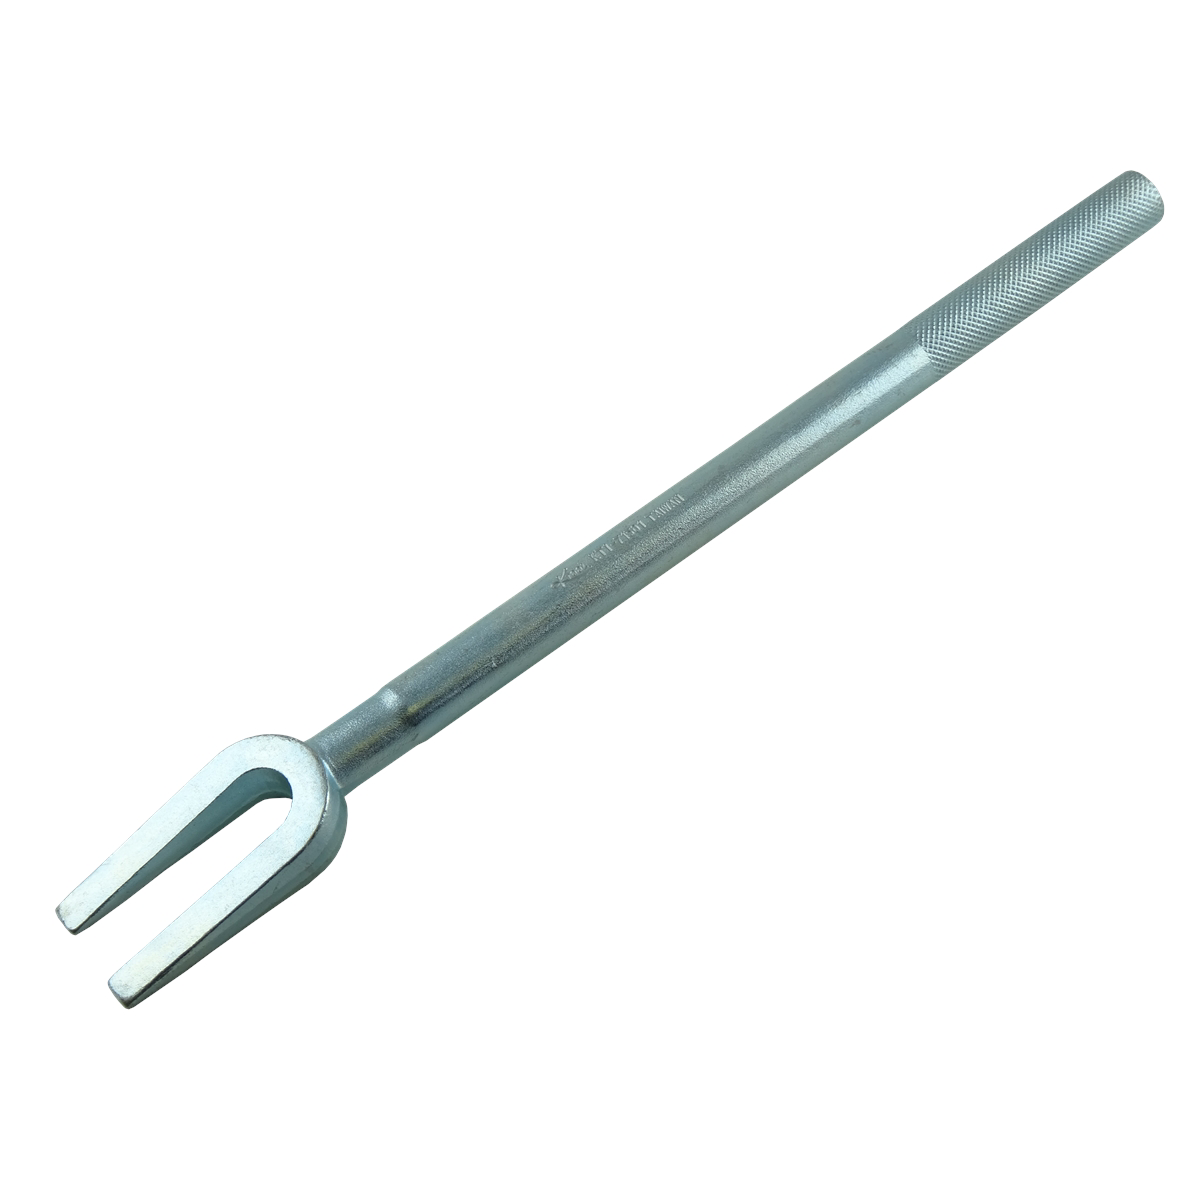 BALL JOINT SEPARATOR PICKLE FORK - image 1 of 2